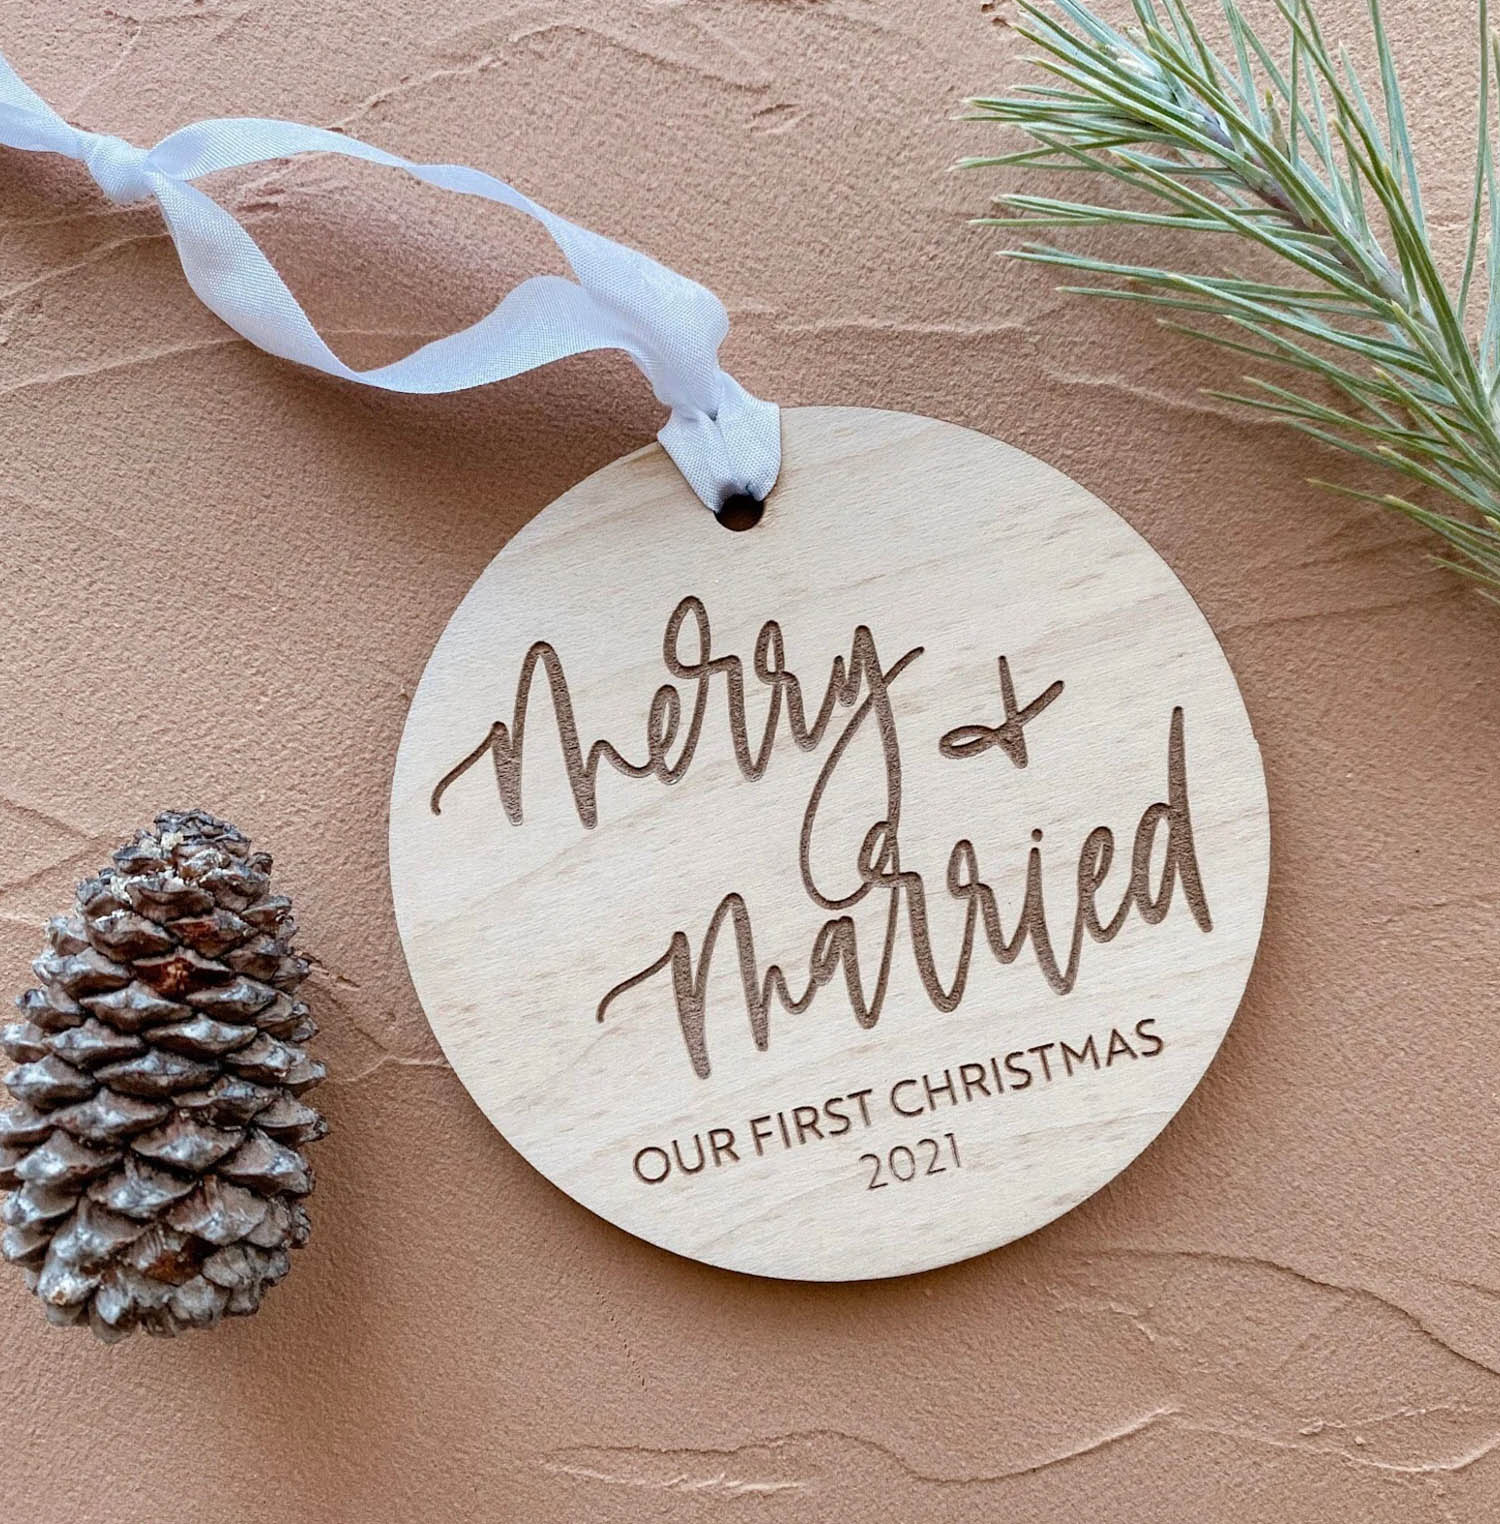 Gifts for Christmas Touber Our First Christmas Mr & Mrs Ornament 2021 Wedding Christmas Ornaments 2021 First Christmas Married Ornaments Gifts for Couple Wedding Gifts Married Gifts Engaged Gifts